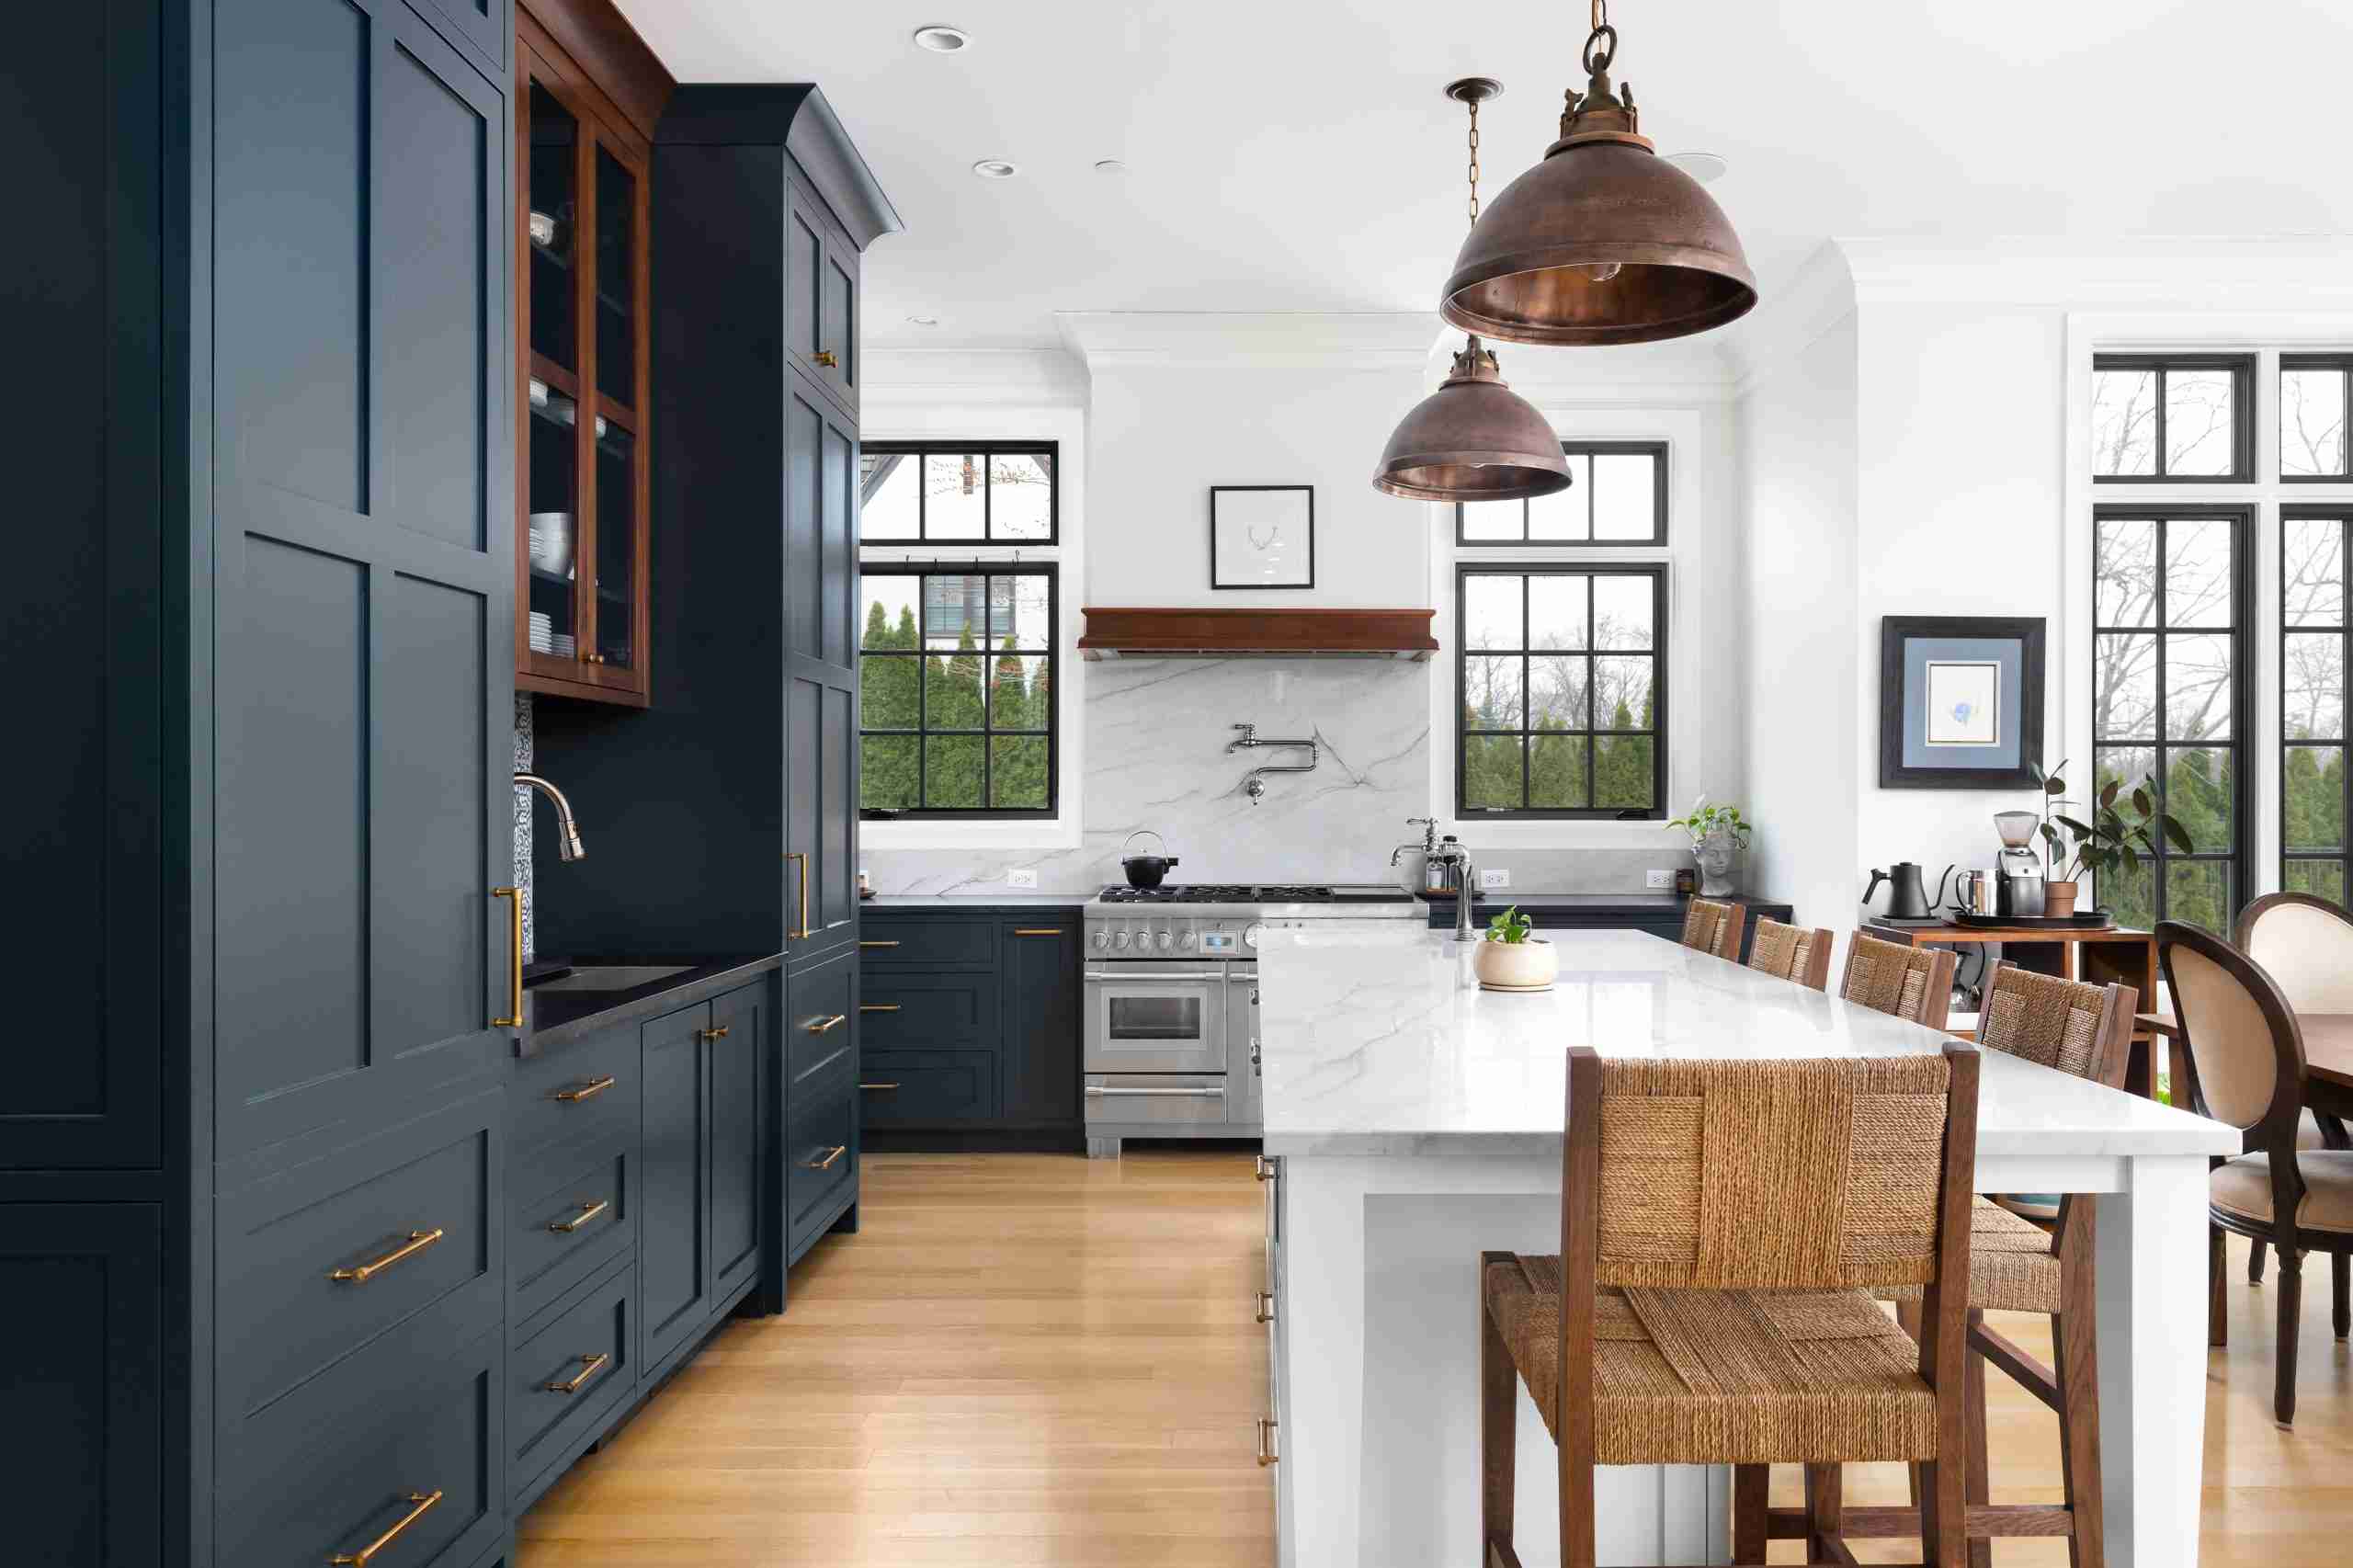 Modern traditional kitchen with dark cabinets and white counters. A kitchen with Mixed metals and wood textures giving a little cottage core vibe too.